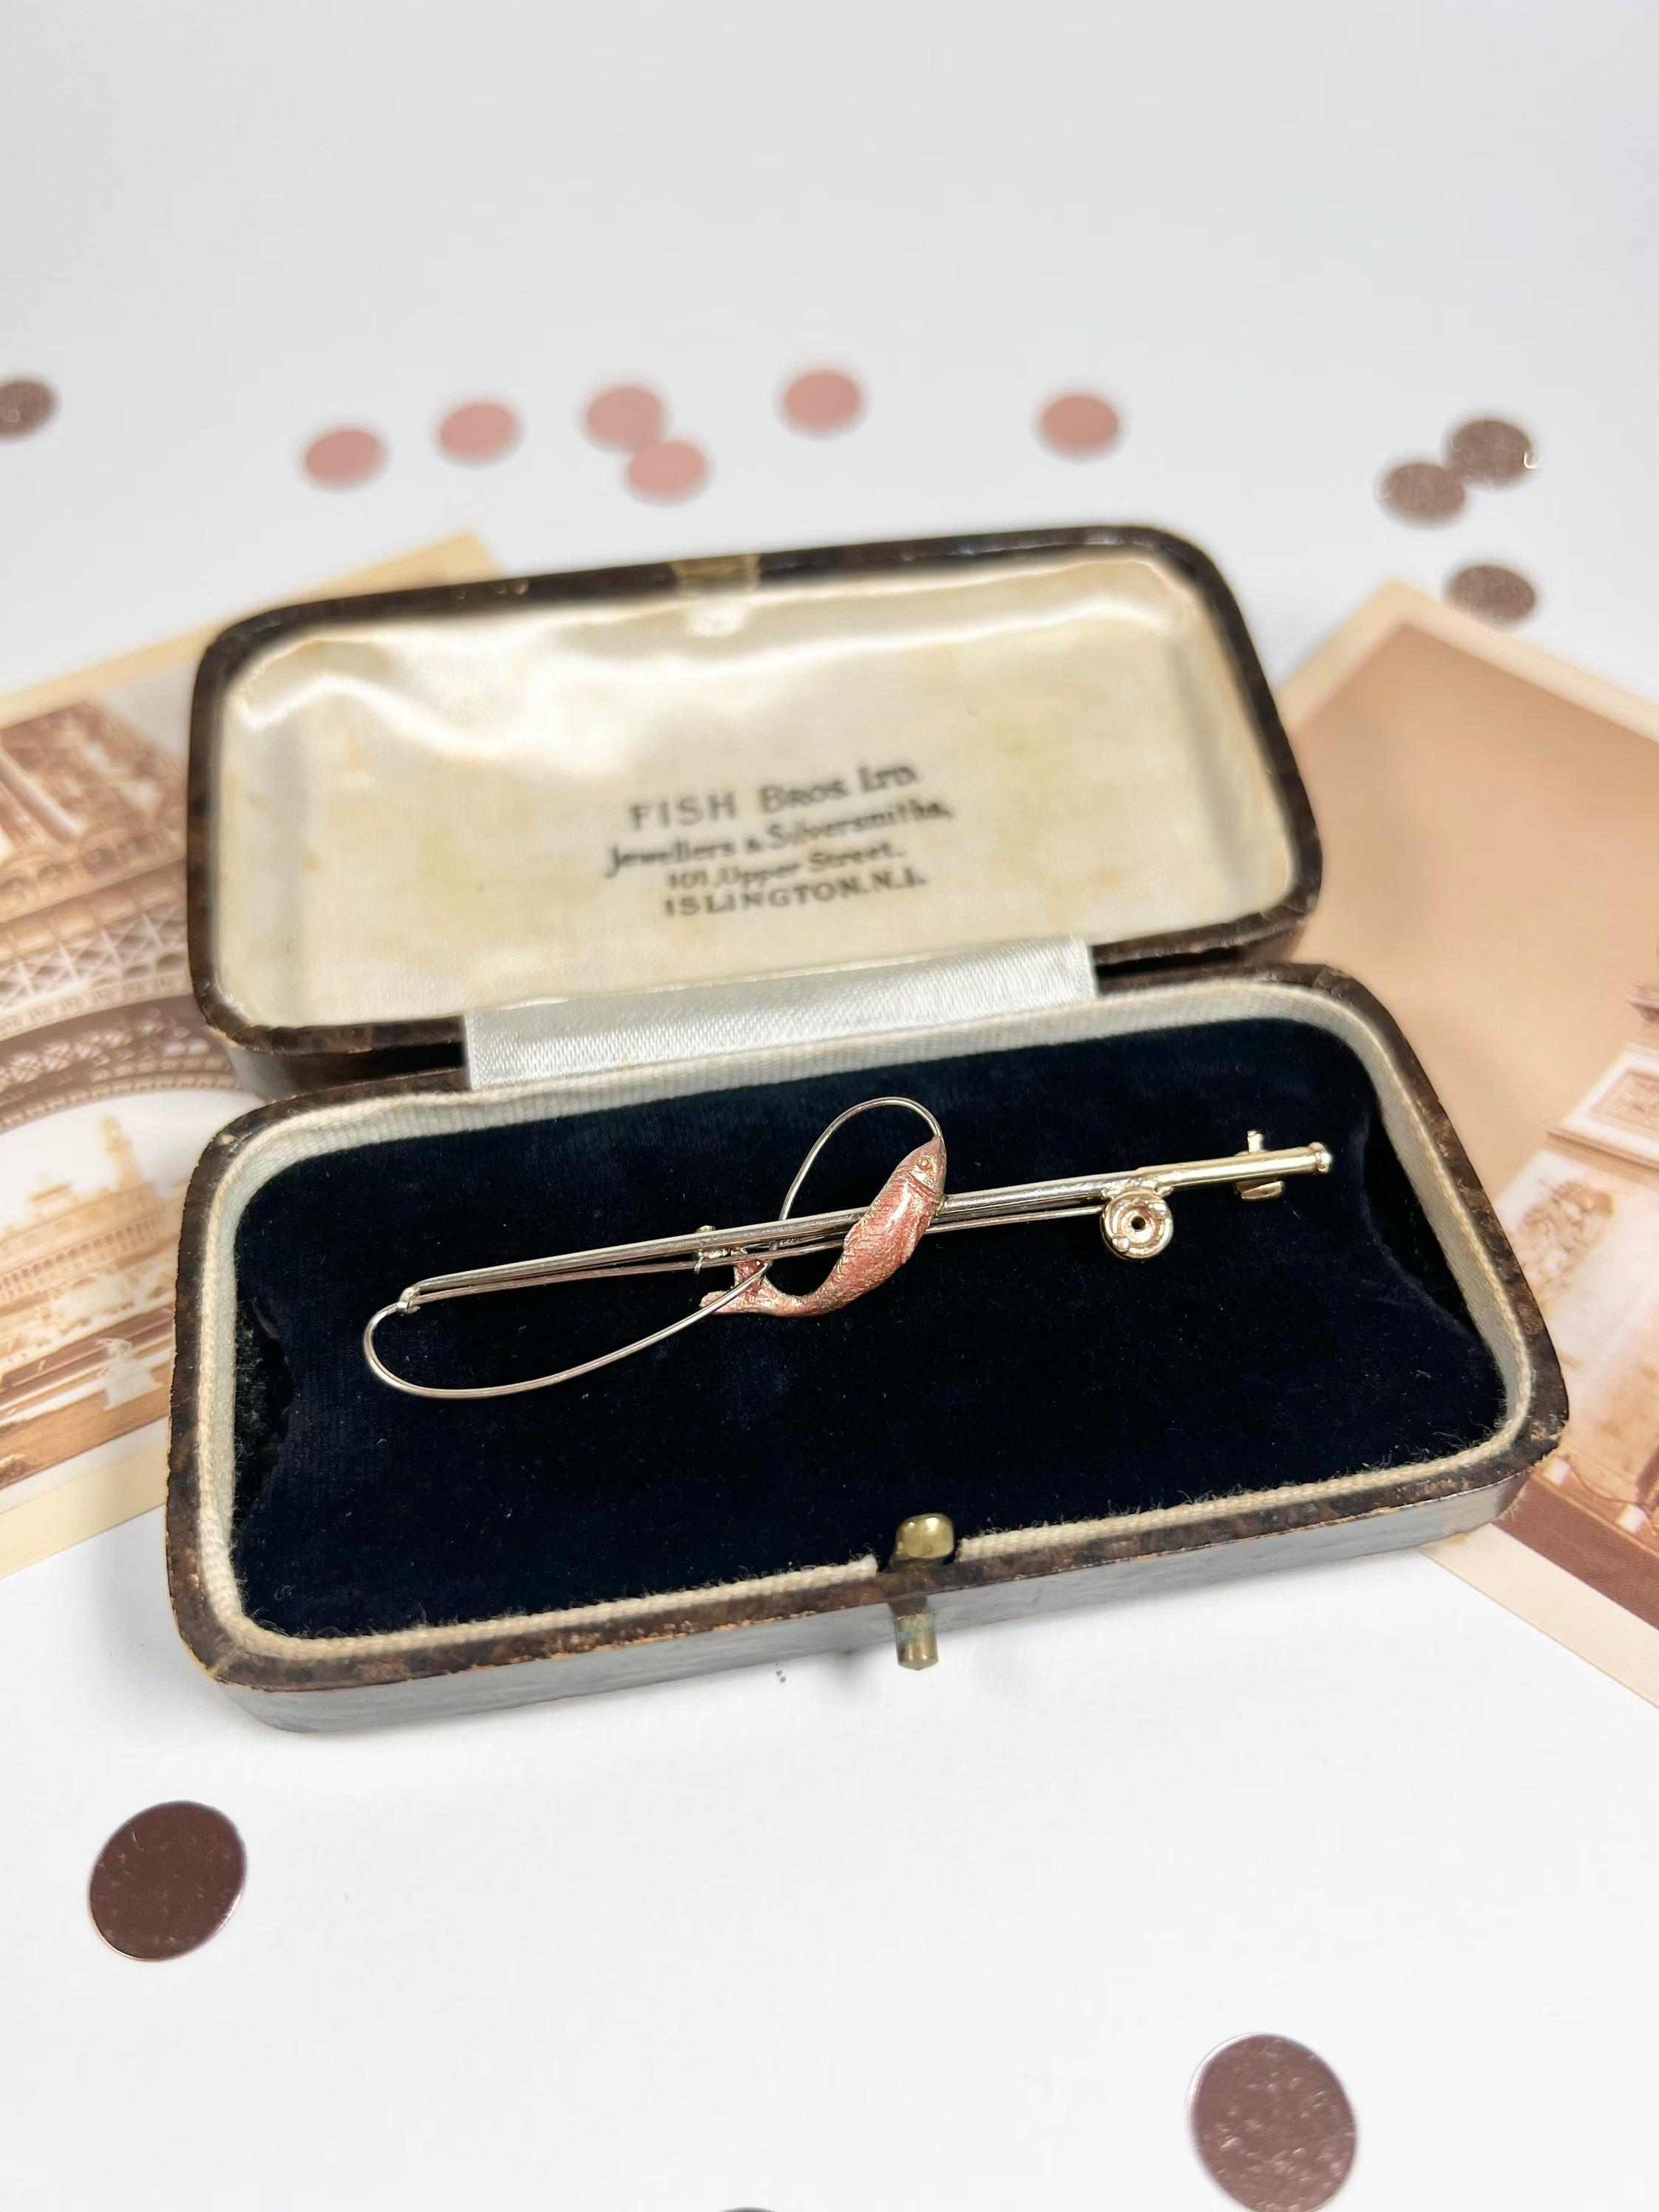 Antique Fishing Rod Brooch

9ct Gold Stamped 

Hallmarked London 1905

Wonderfully crafted, Edwardian gold brooch. Featuring an enamel fish caught on a golden fishing line. 
This would make a lovely gift for any fishing fanatic! 

Measures approx